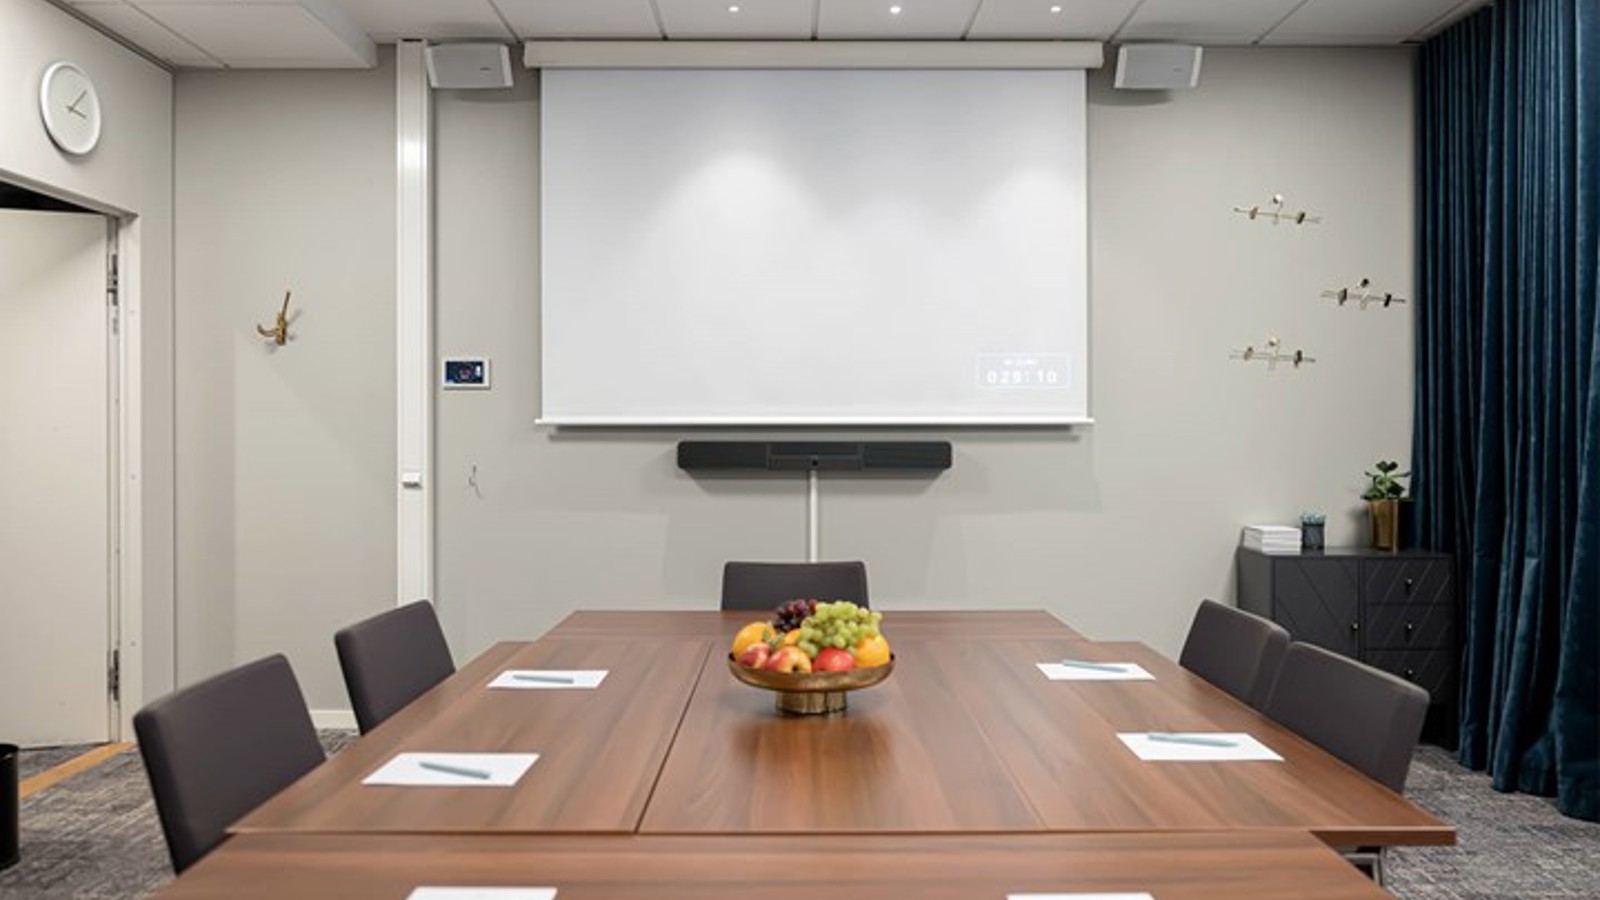 Conference room with brown table, gray chairs, light walls and a projector